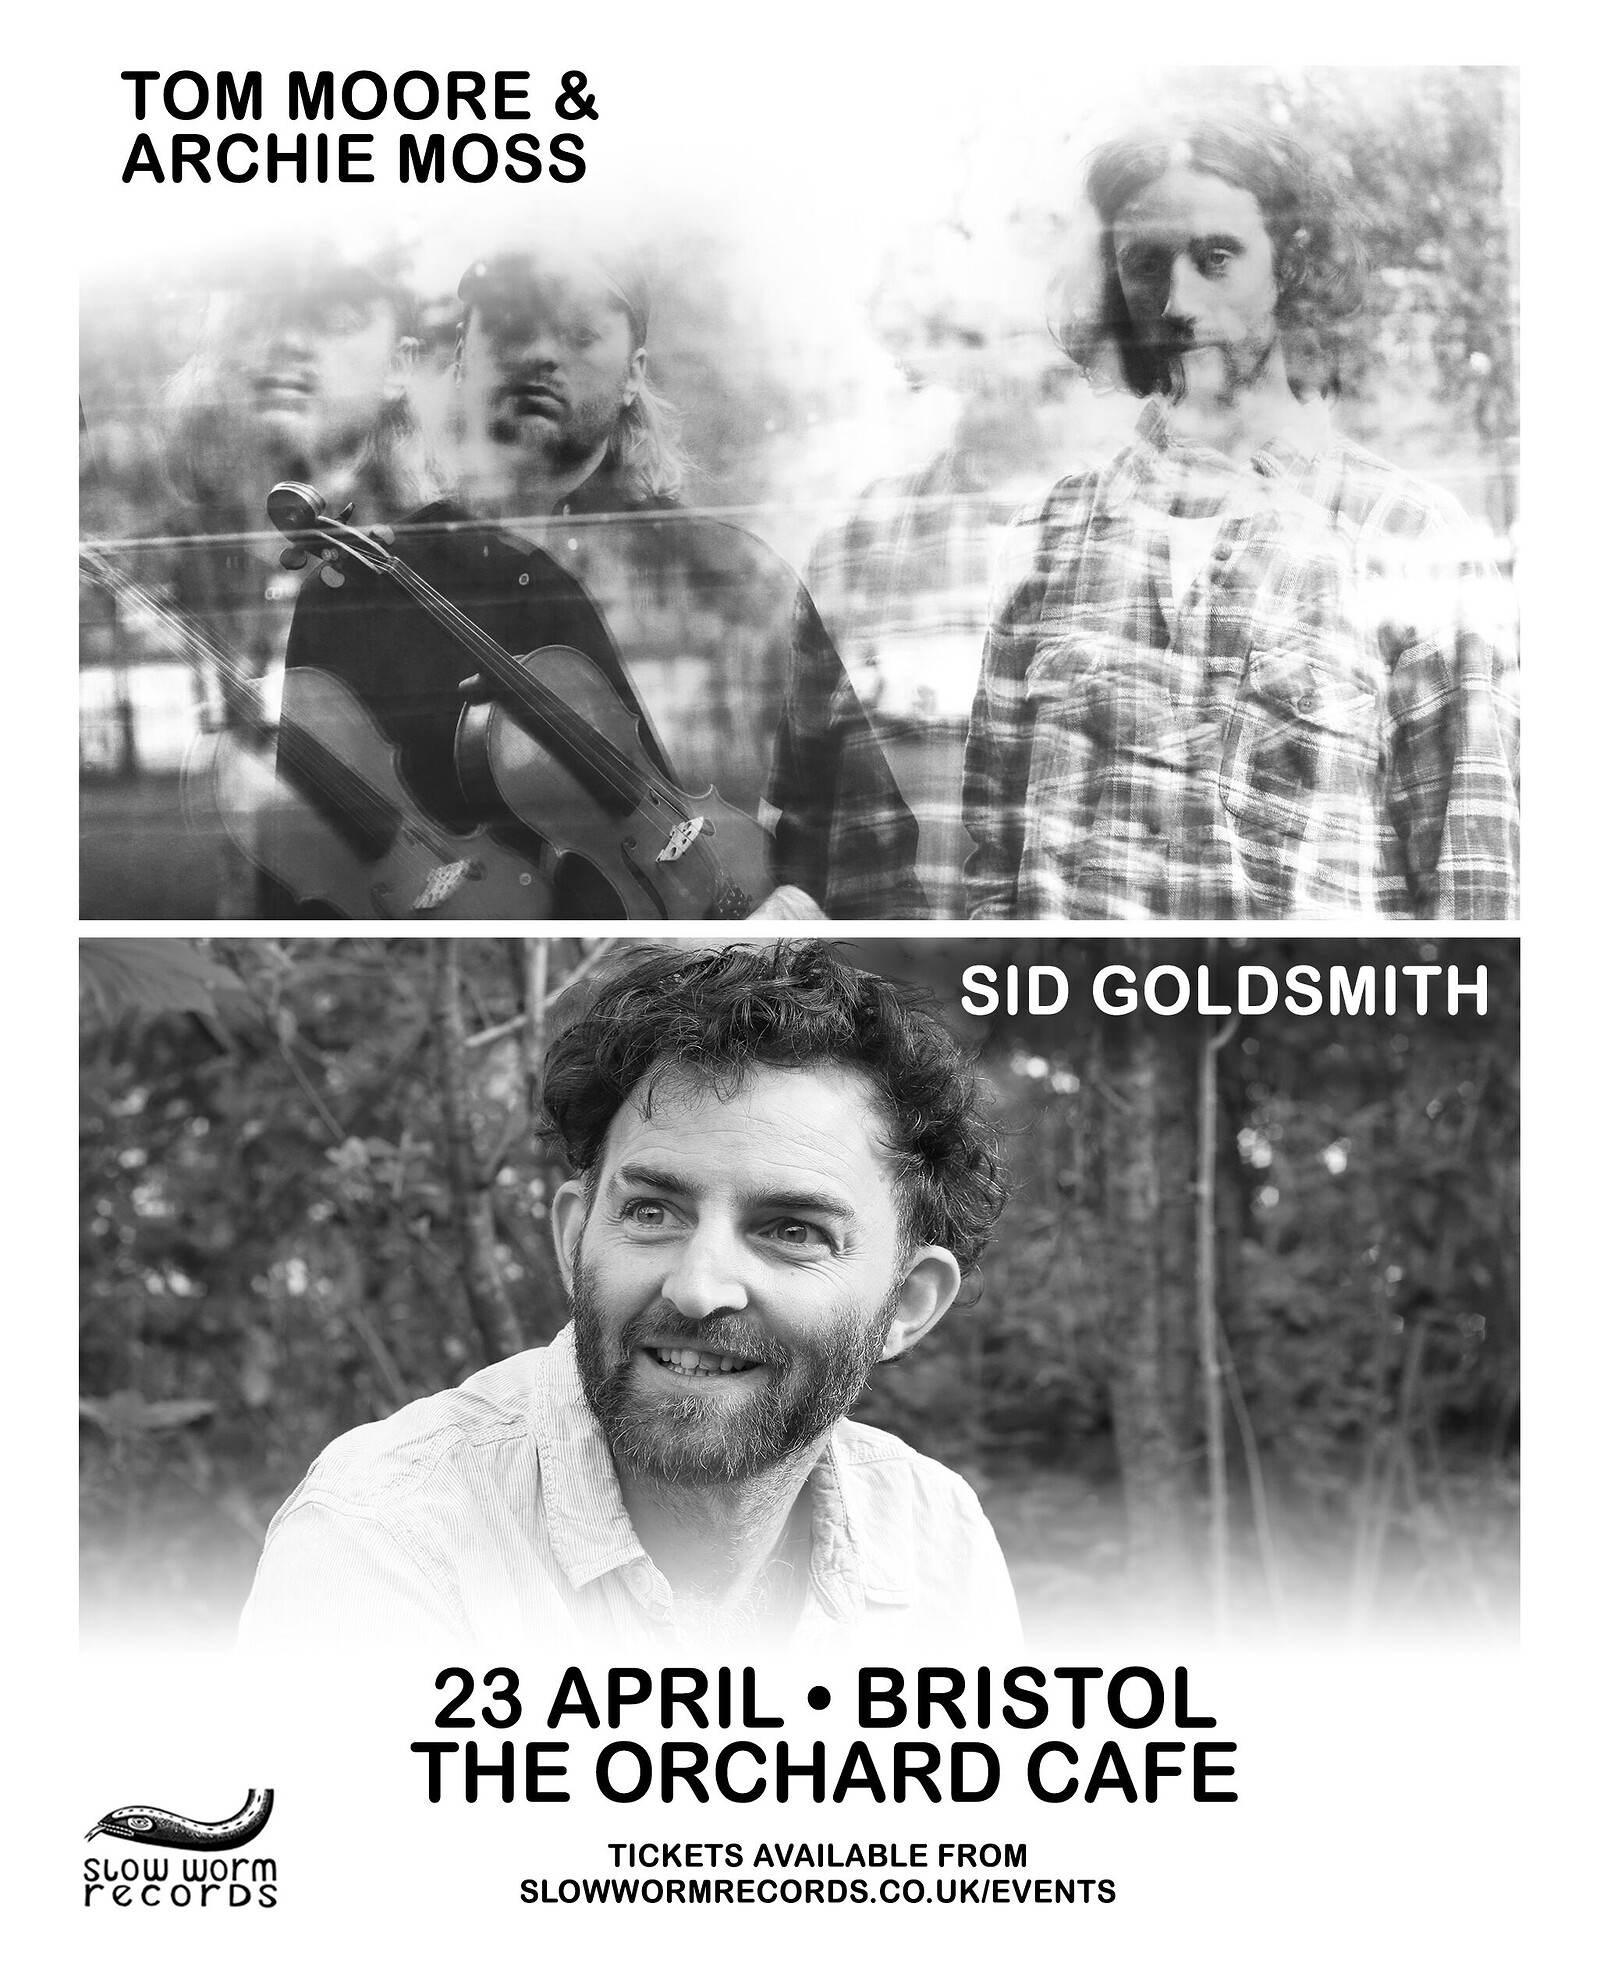 Tom Moore & Archie Moss + Sid Goldsmith at The Orchard Coffee & Co